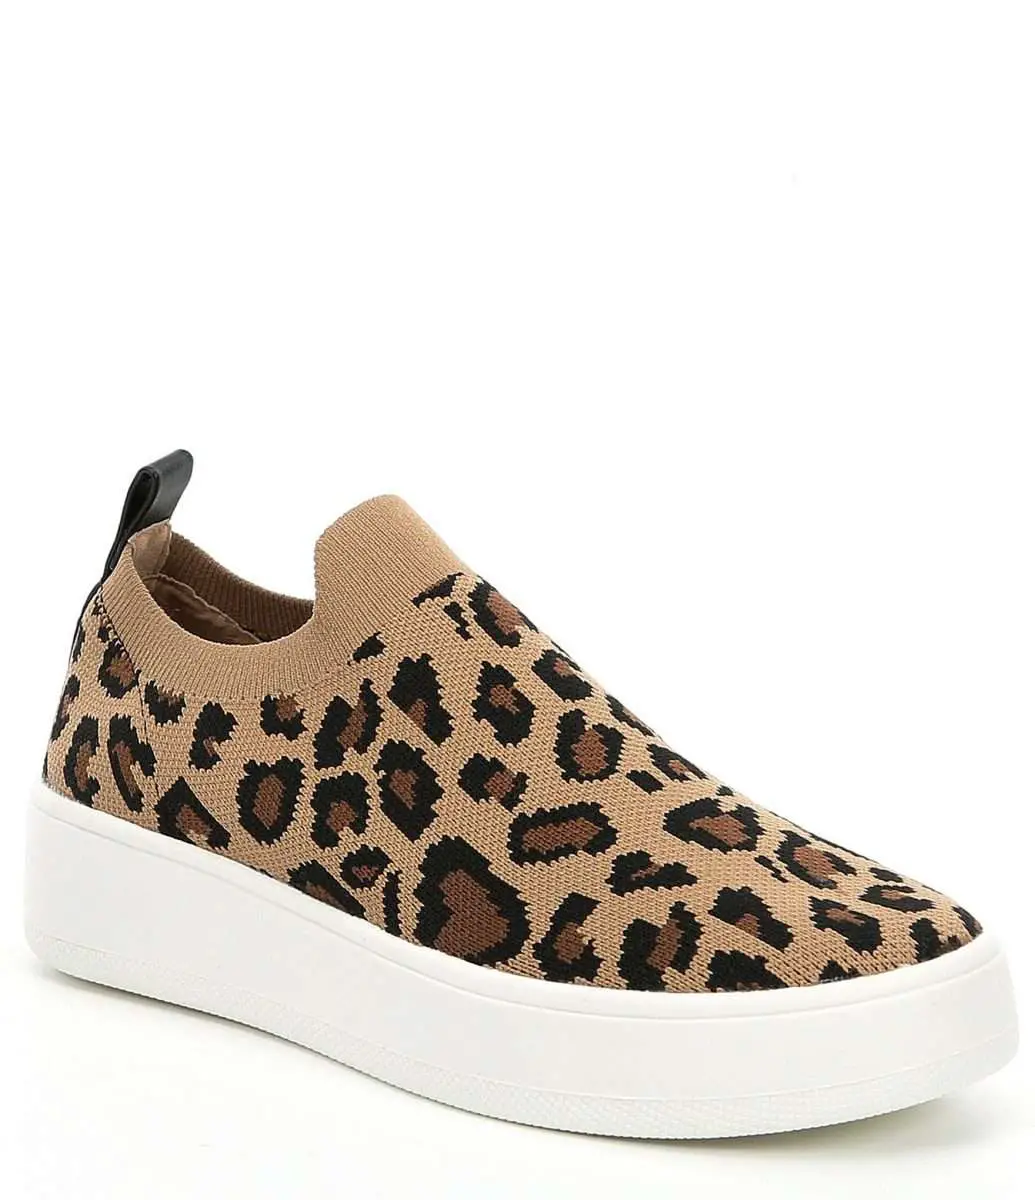 Steve Madden Beale Leopard Print Stretch Knit Sneakers in Brown